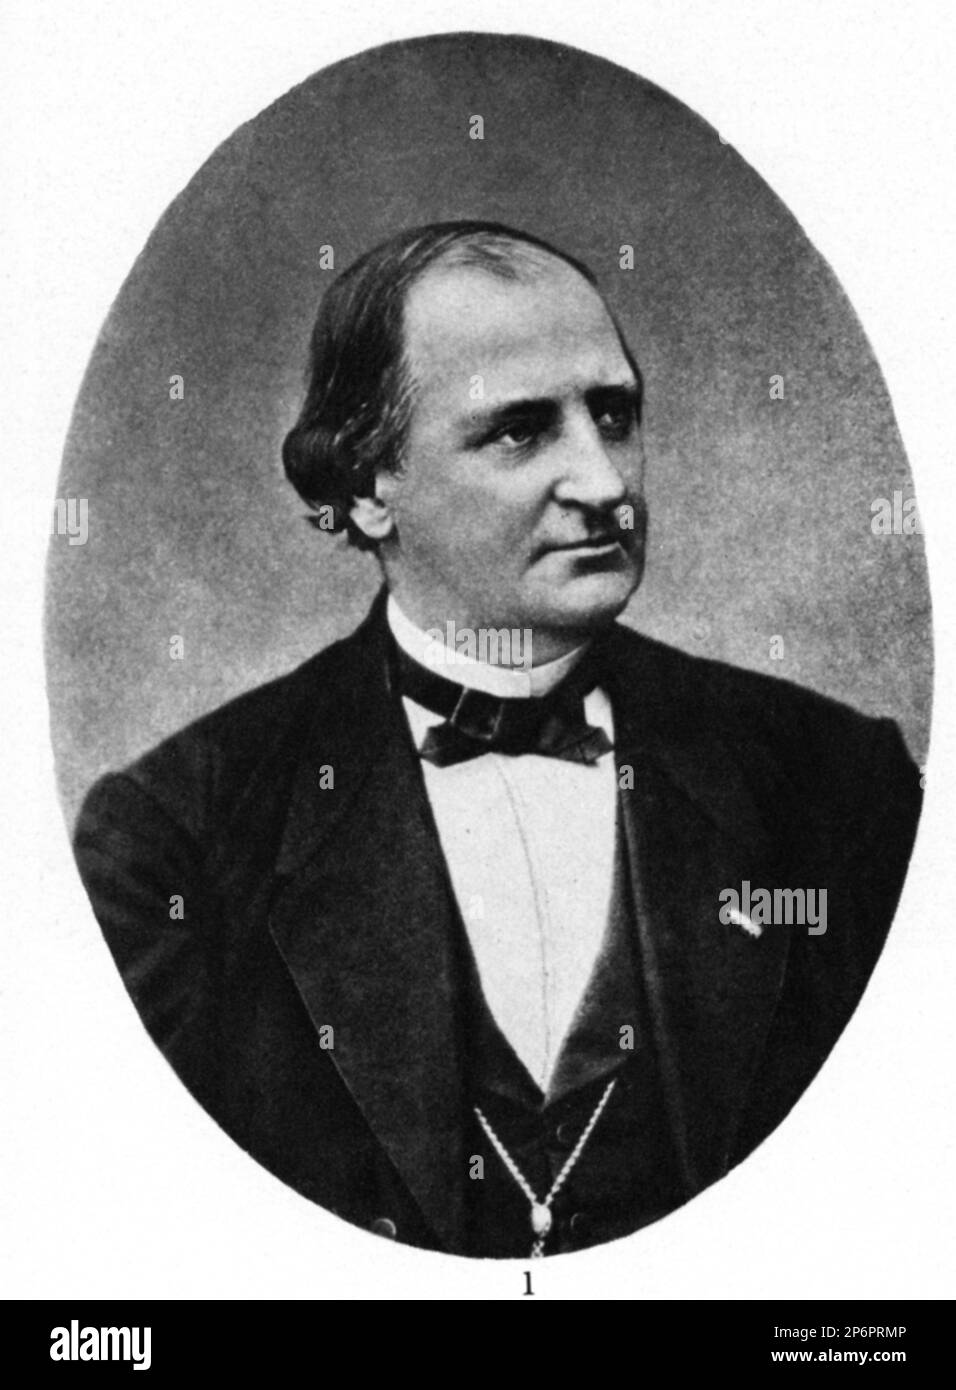 1870 c, GERMANY : The german  conductor and music composer FRANZ ABT  ( 1819- 1885 ) . He wrote over 600 works and made a successful tour through America in 1872 . Photo by Paul Klemann , Haanover , Germany - DIRETTORE D' ORCHESTRA - COMPOSITORE - OPERA LIRICA - CLASSICA - CLASSICAL - PORTRAIT - RITRATTO - MUSICISTA - MUSICA  papillon - CRAVATTA - TIE - -- ARCHIVIO GBB Stock Photo